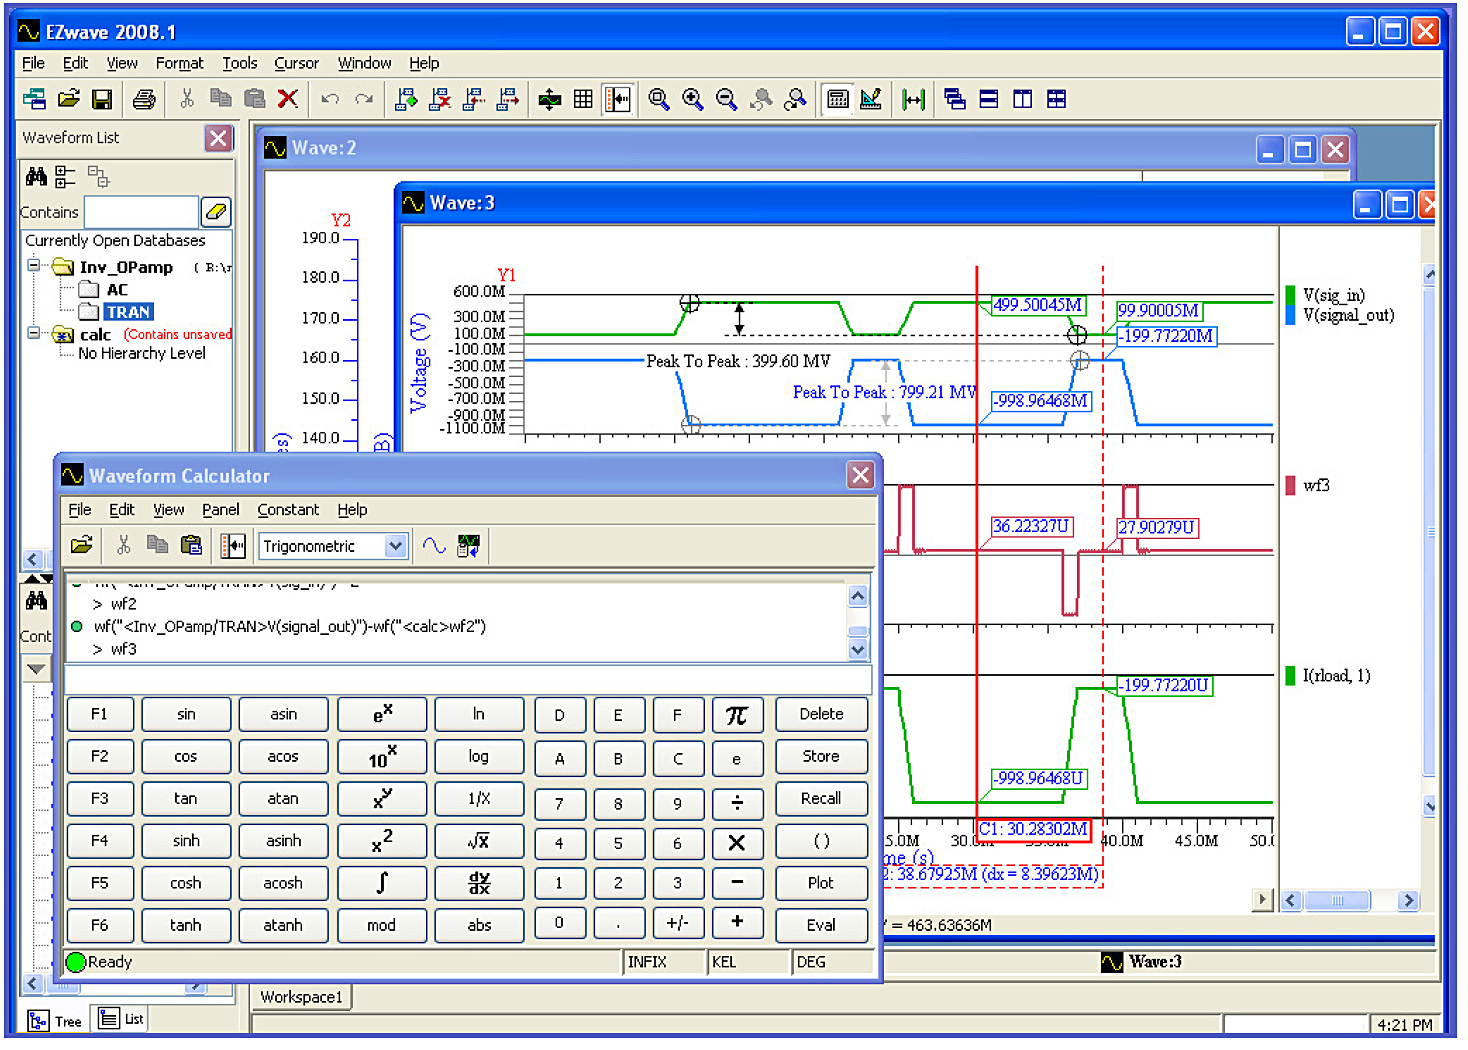 Use built-in measurement tools and the waveform calculator to perform post-processing analysis of the results